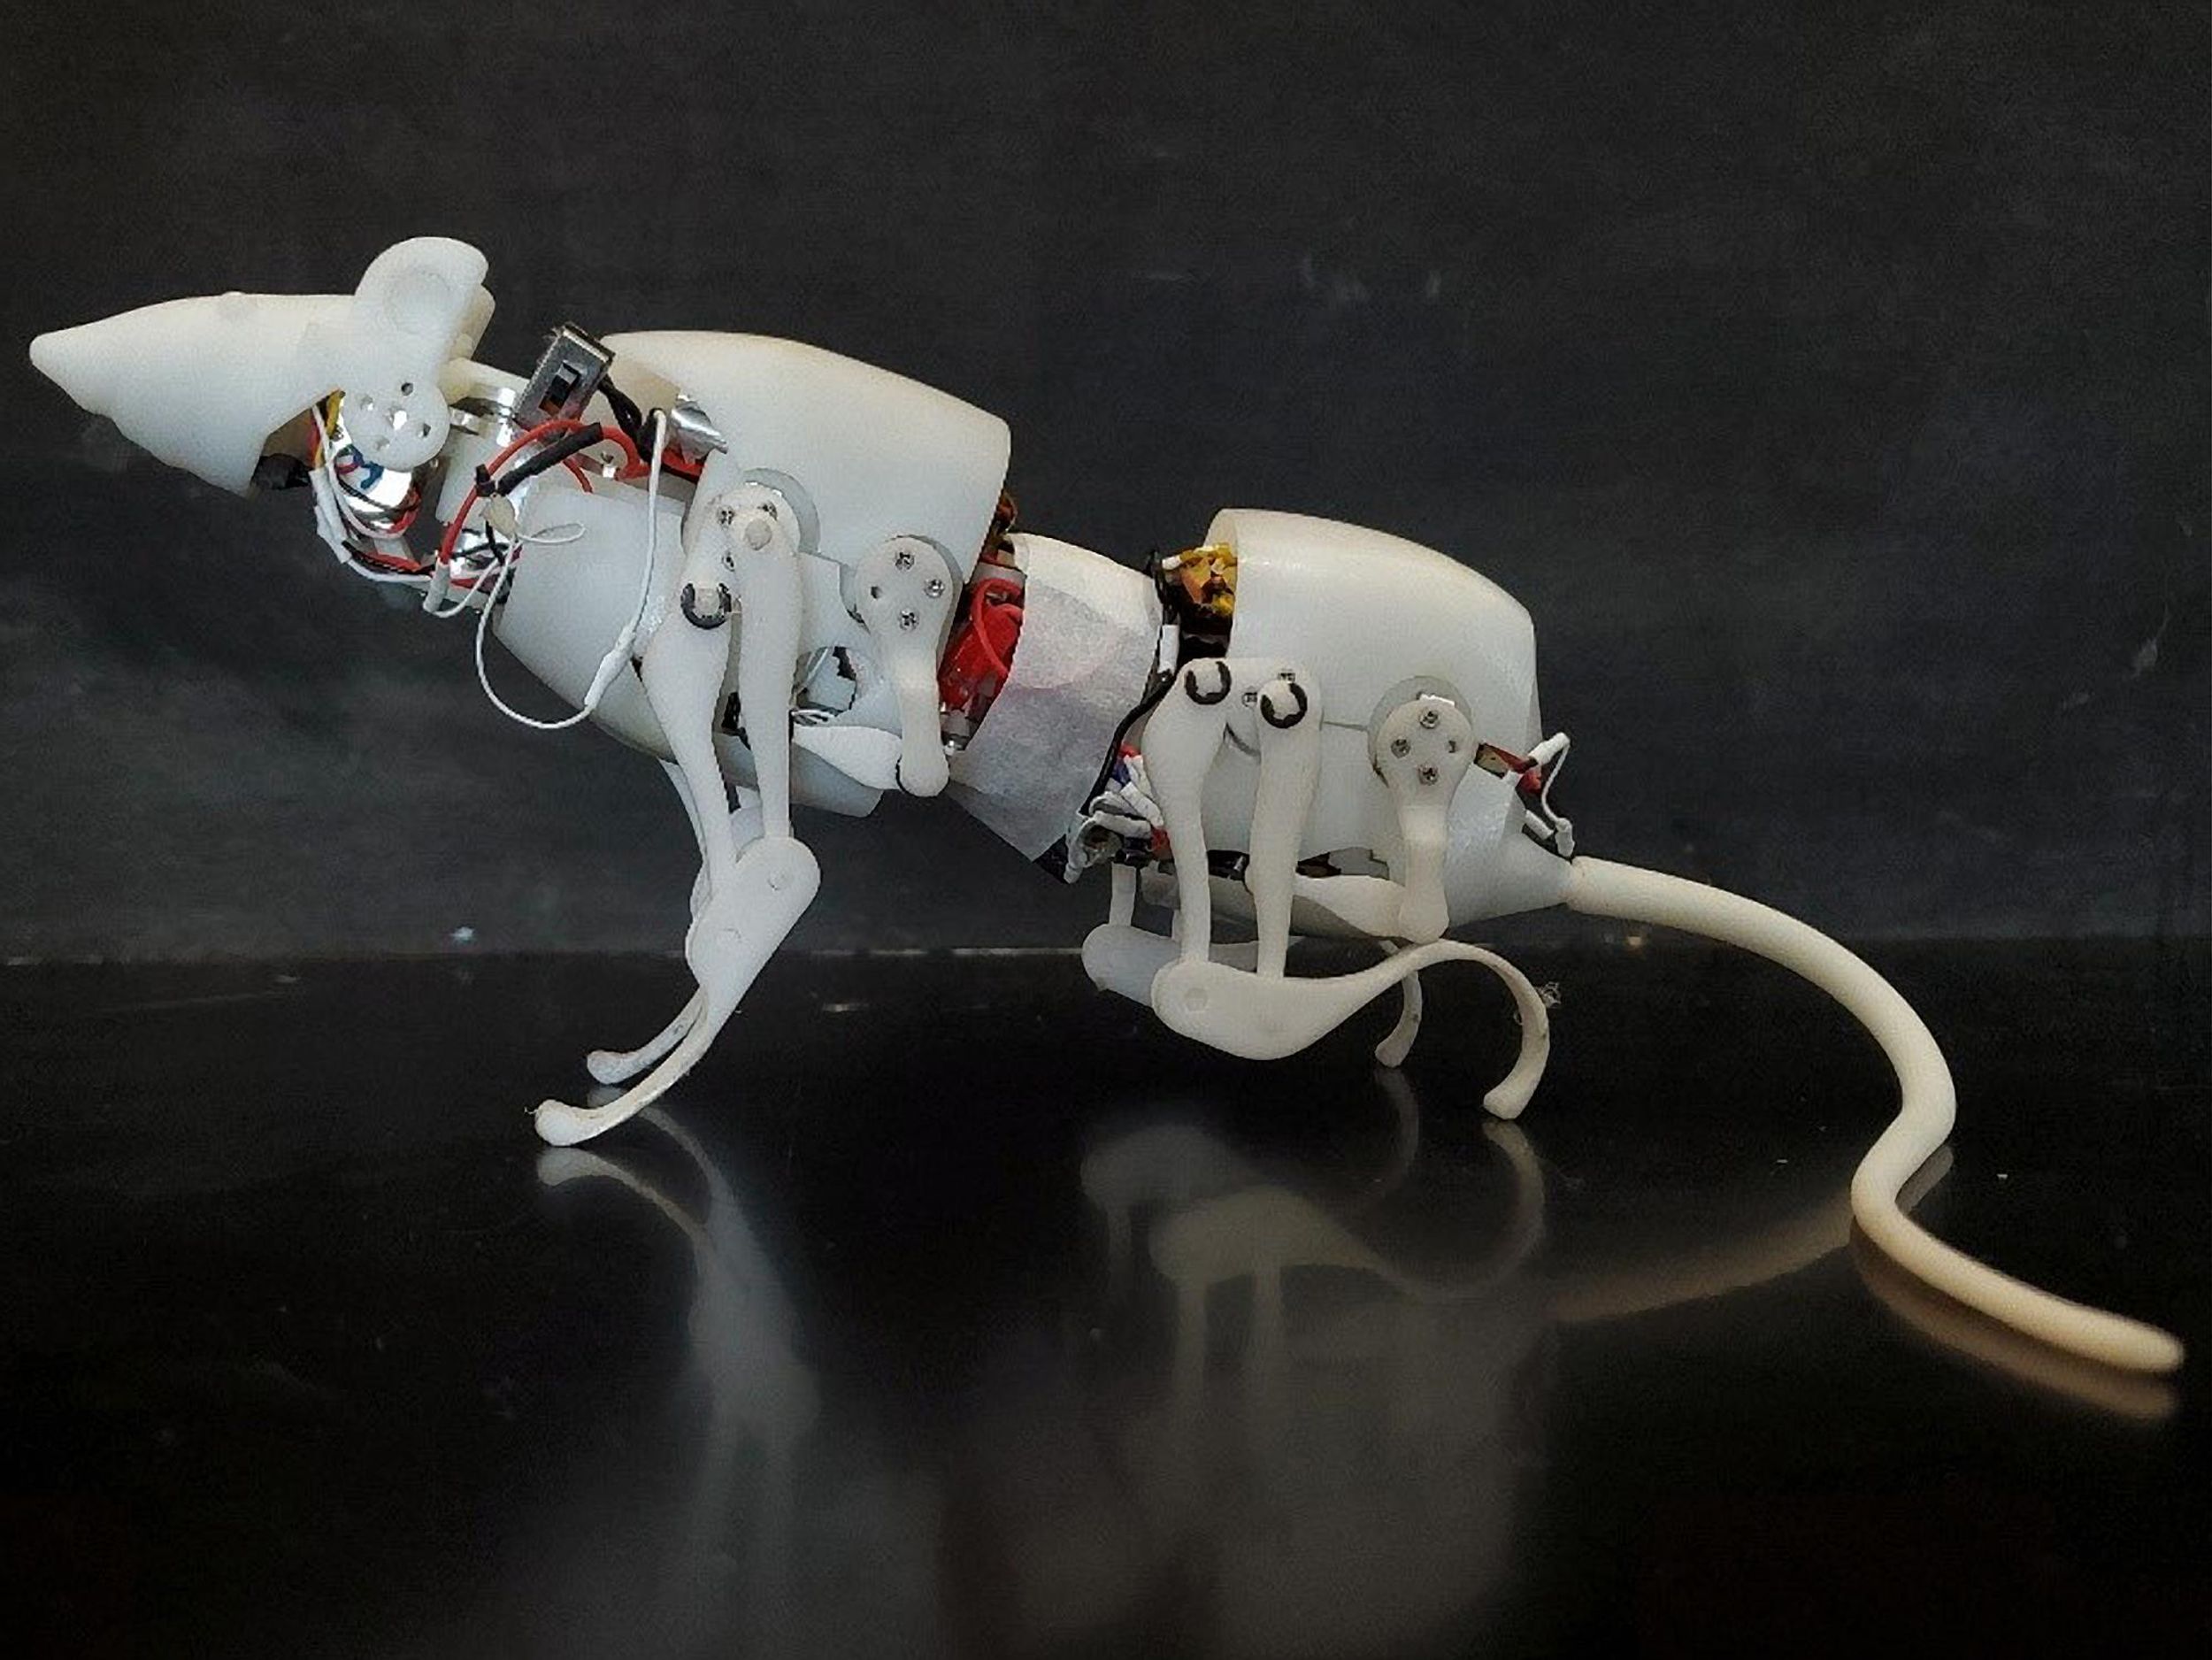 A furless robot rat, showing white plastic limbs and tail. White plastic also forms the heads and body segments, encasing electronic components.